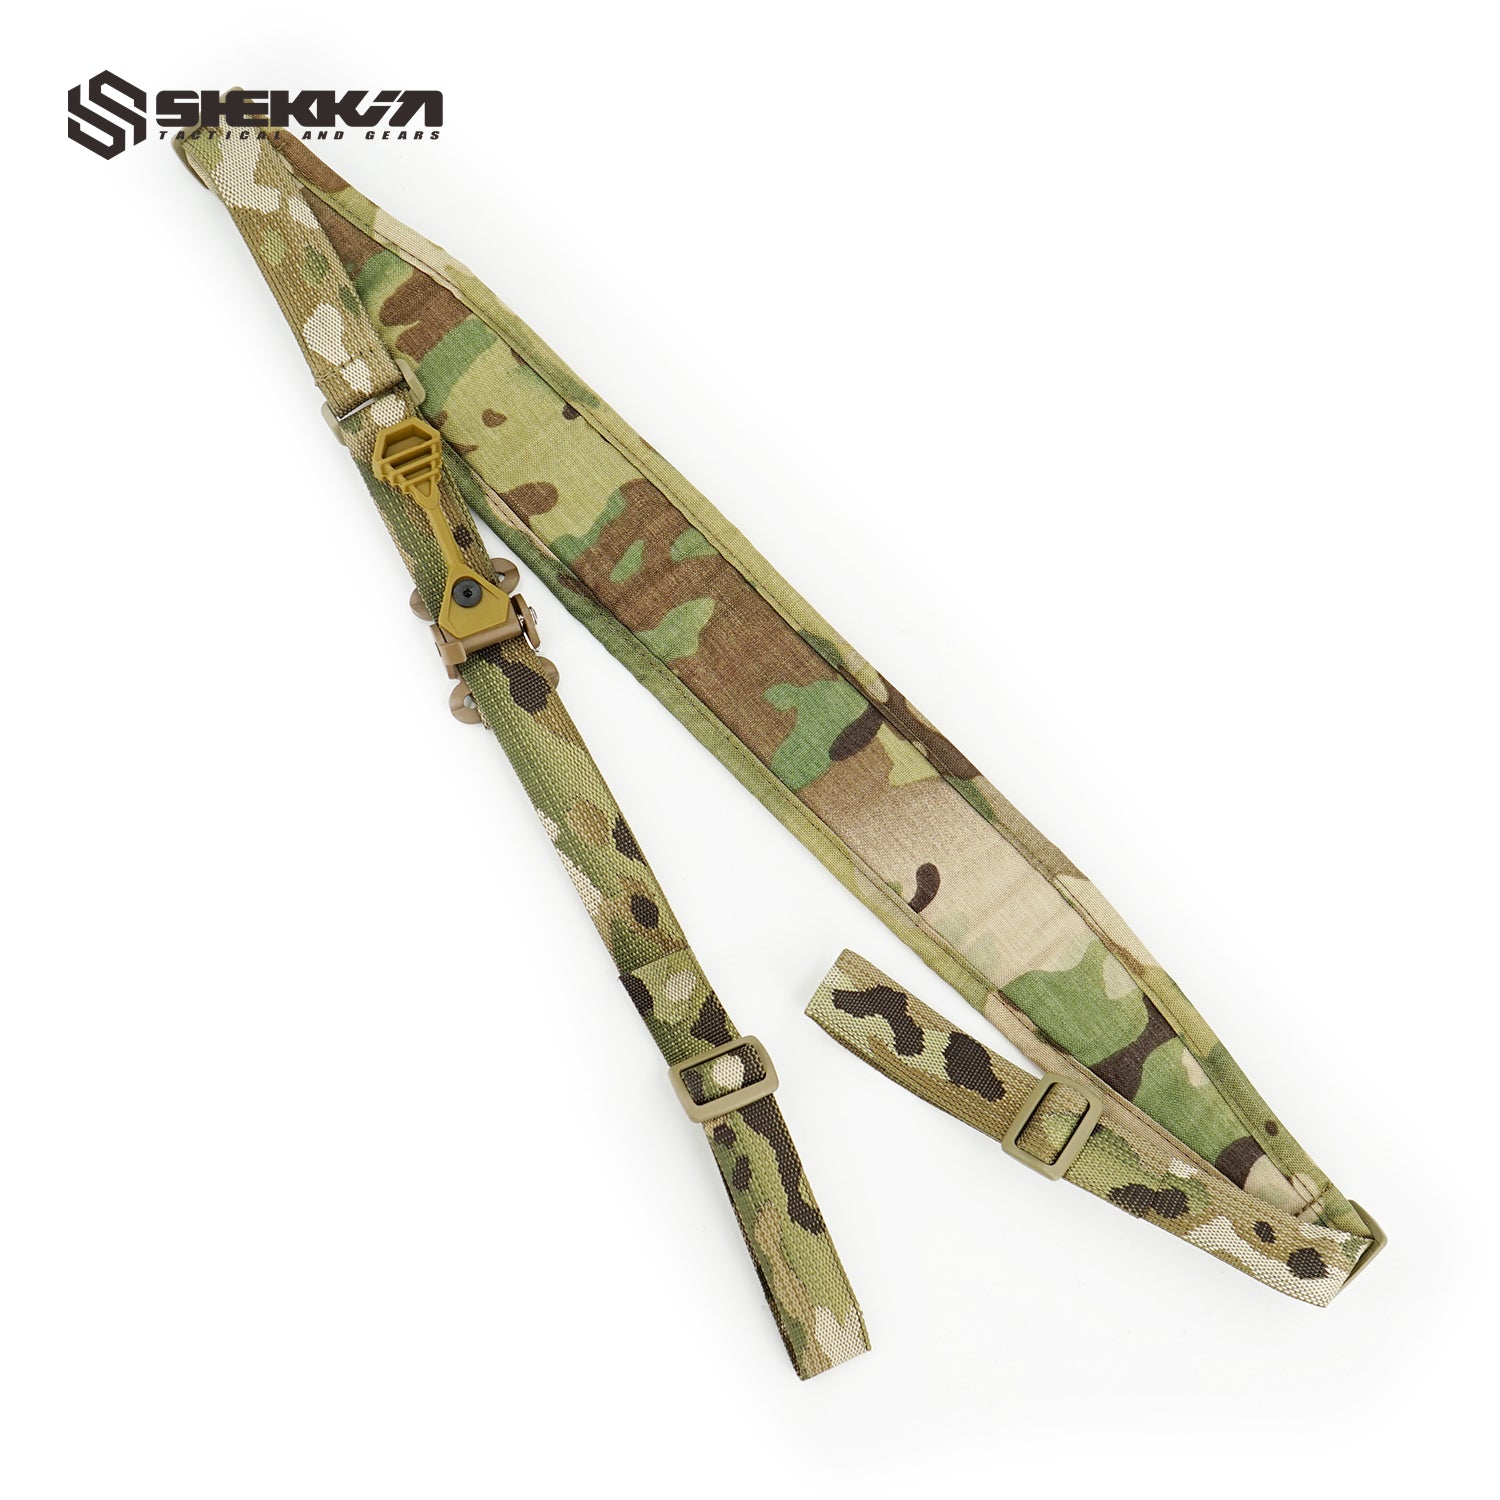 Slingster style two point tactical sling - Shekkin Gears